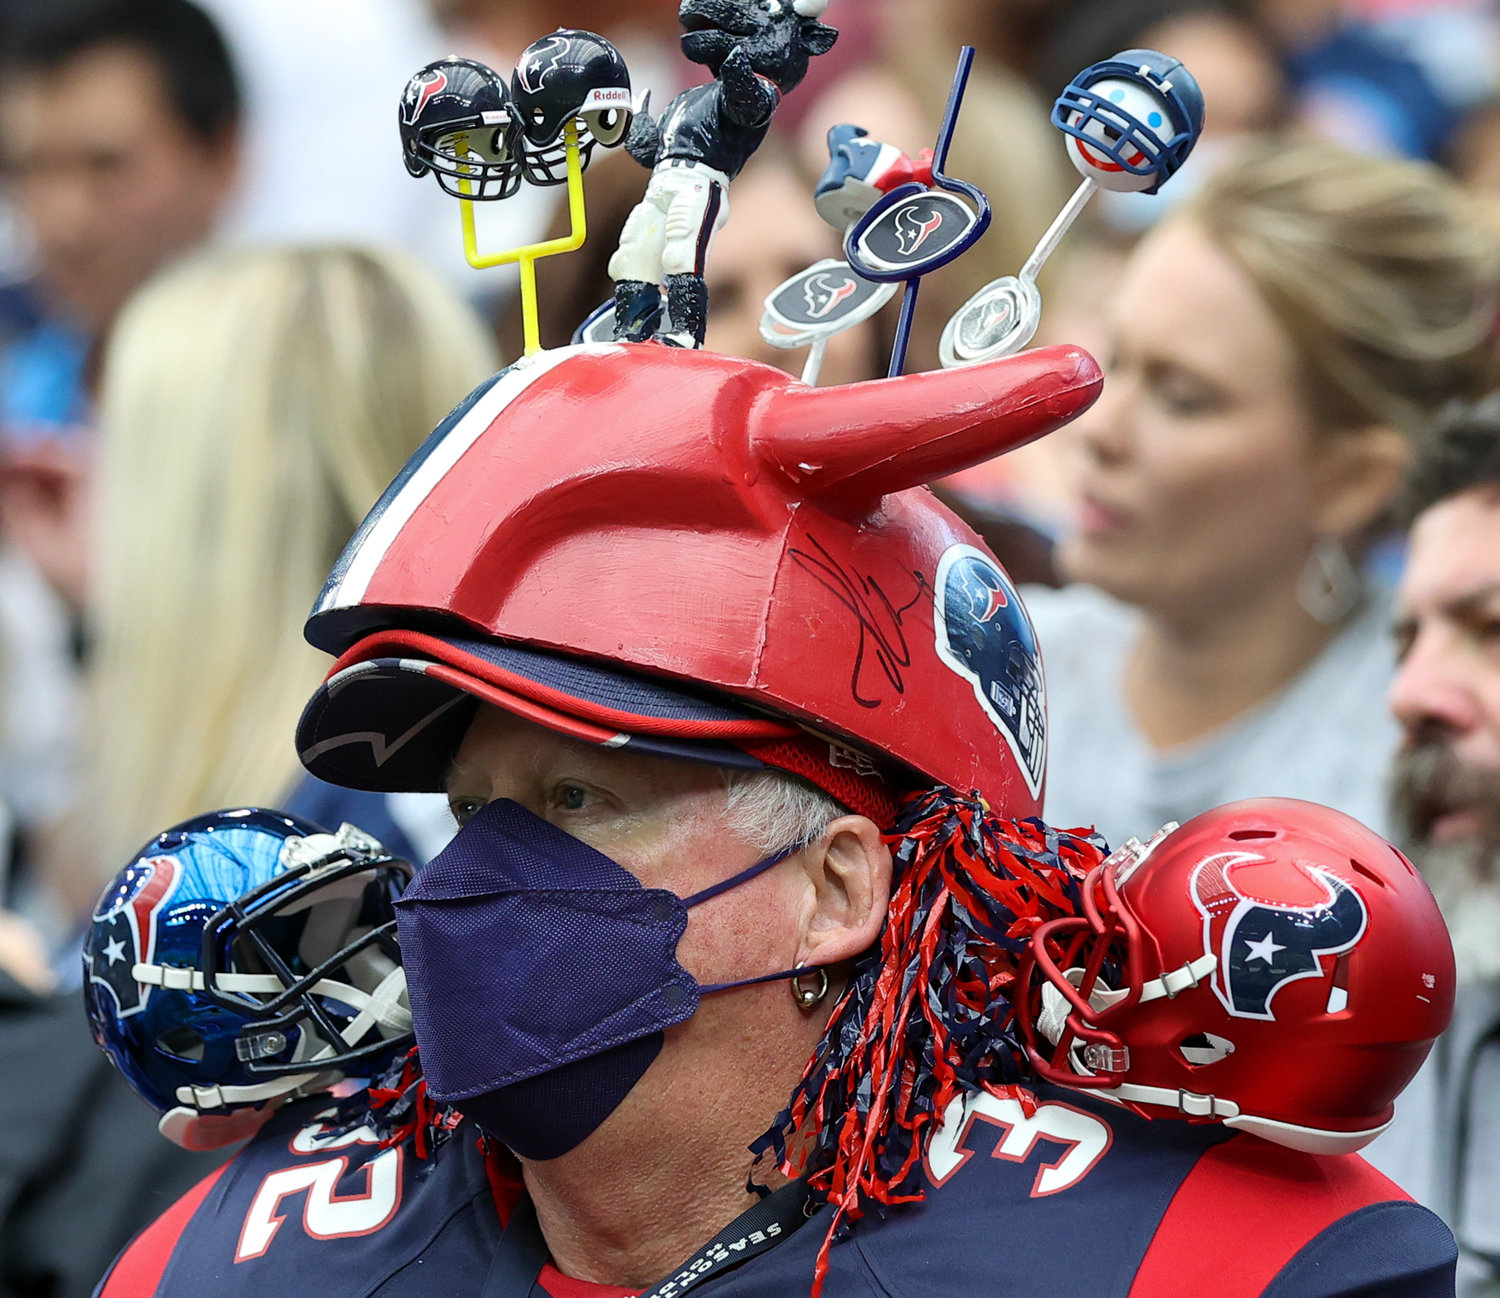 A Houston Texans fan during an NFL game between the Texans and the Titans on Jan. 9, 2022 in Houston, Texas. The Titans won, 28-25.